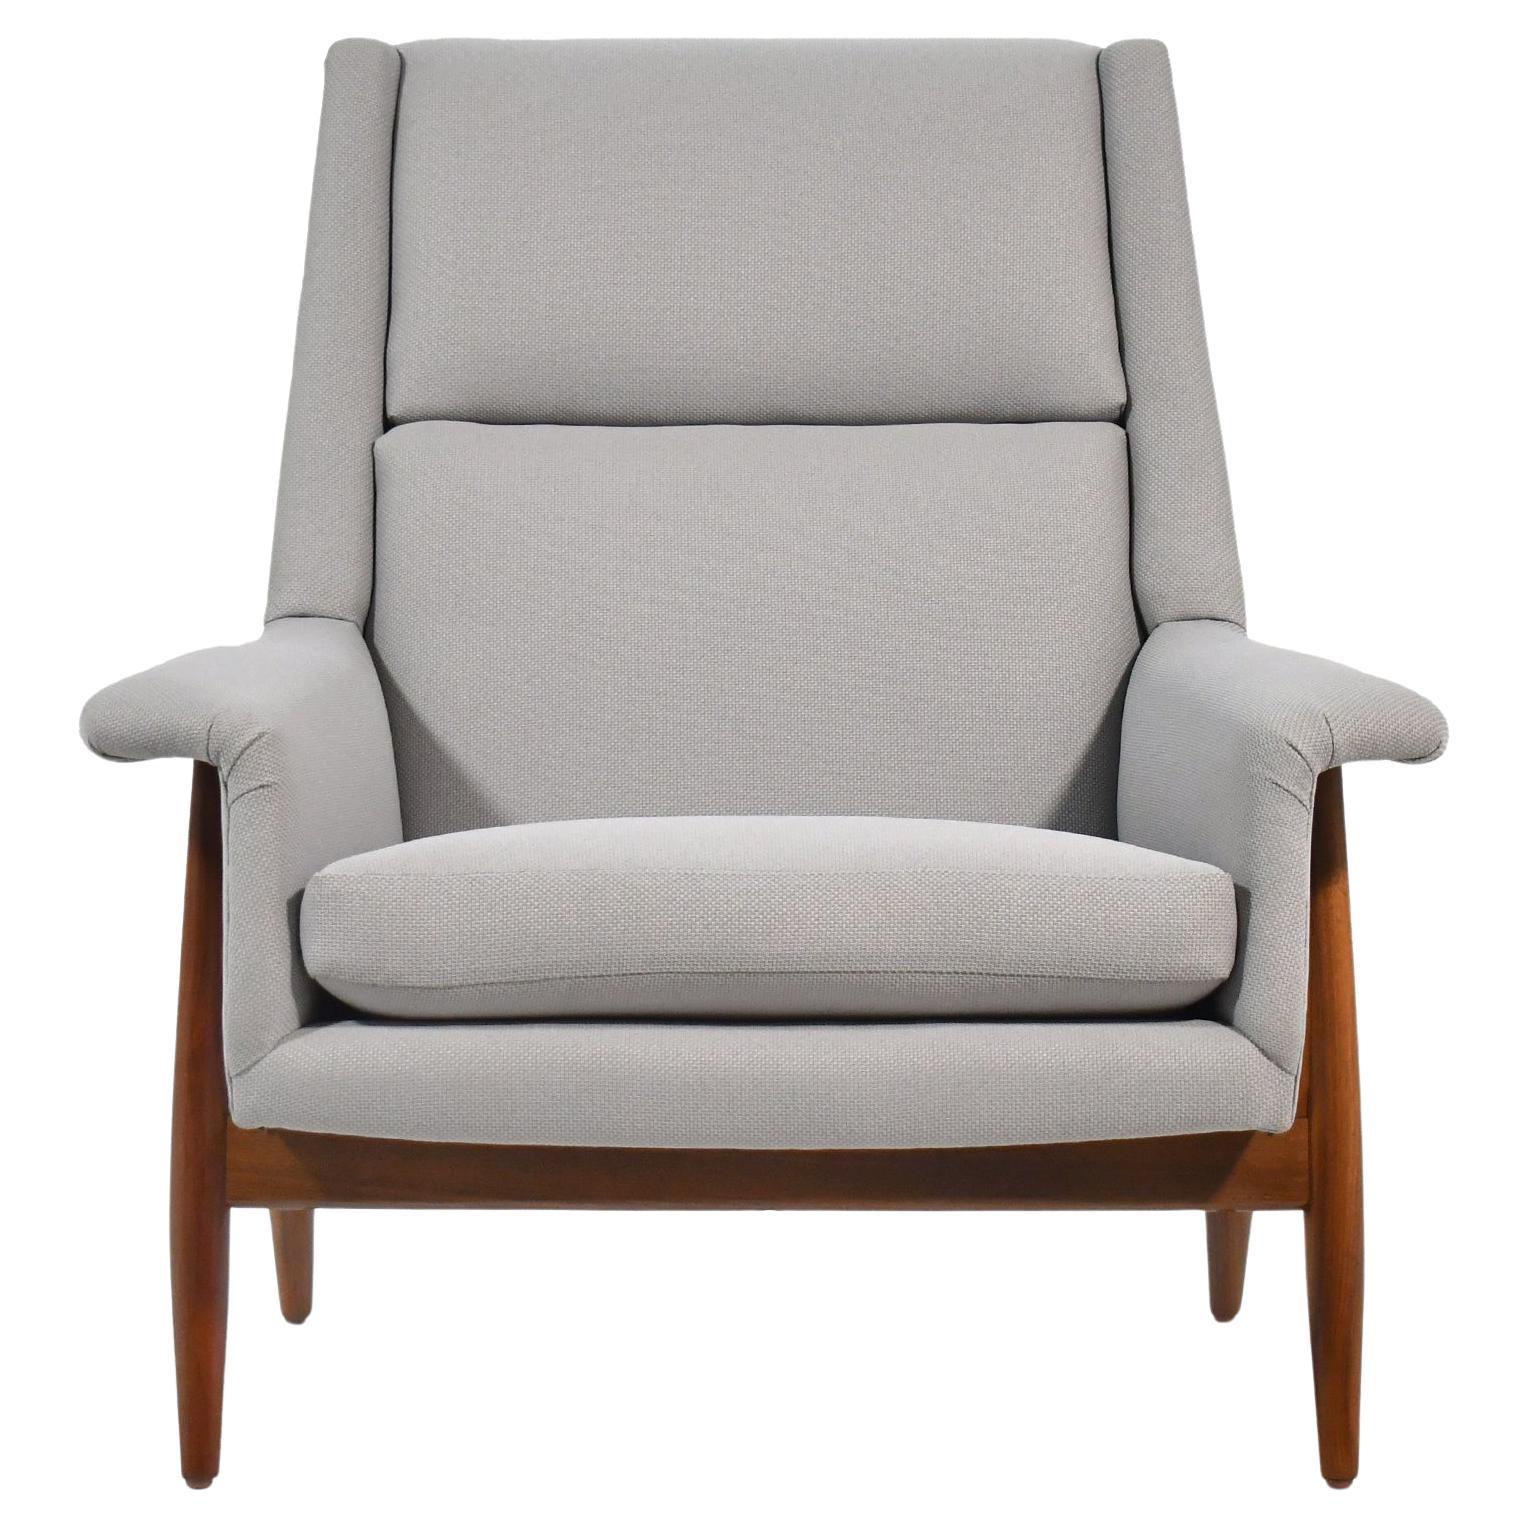 Milo Baughman Lounge Chair by Thayer Coggin For Sale